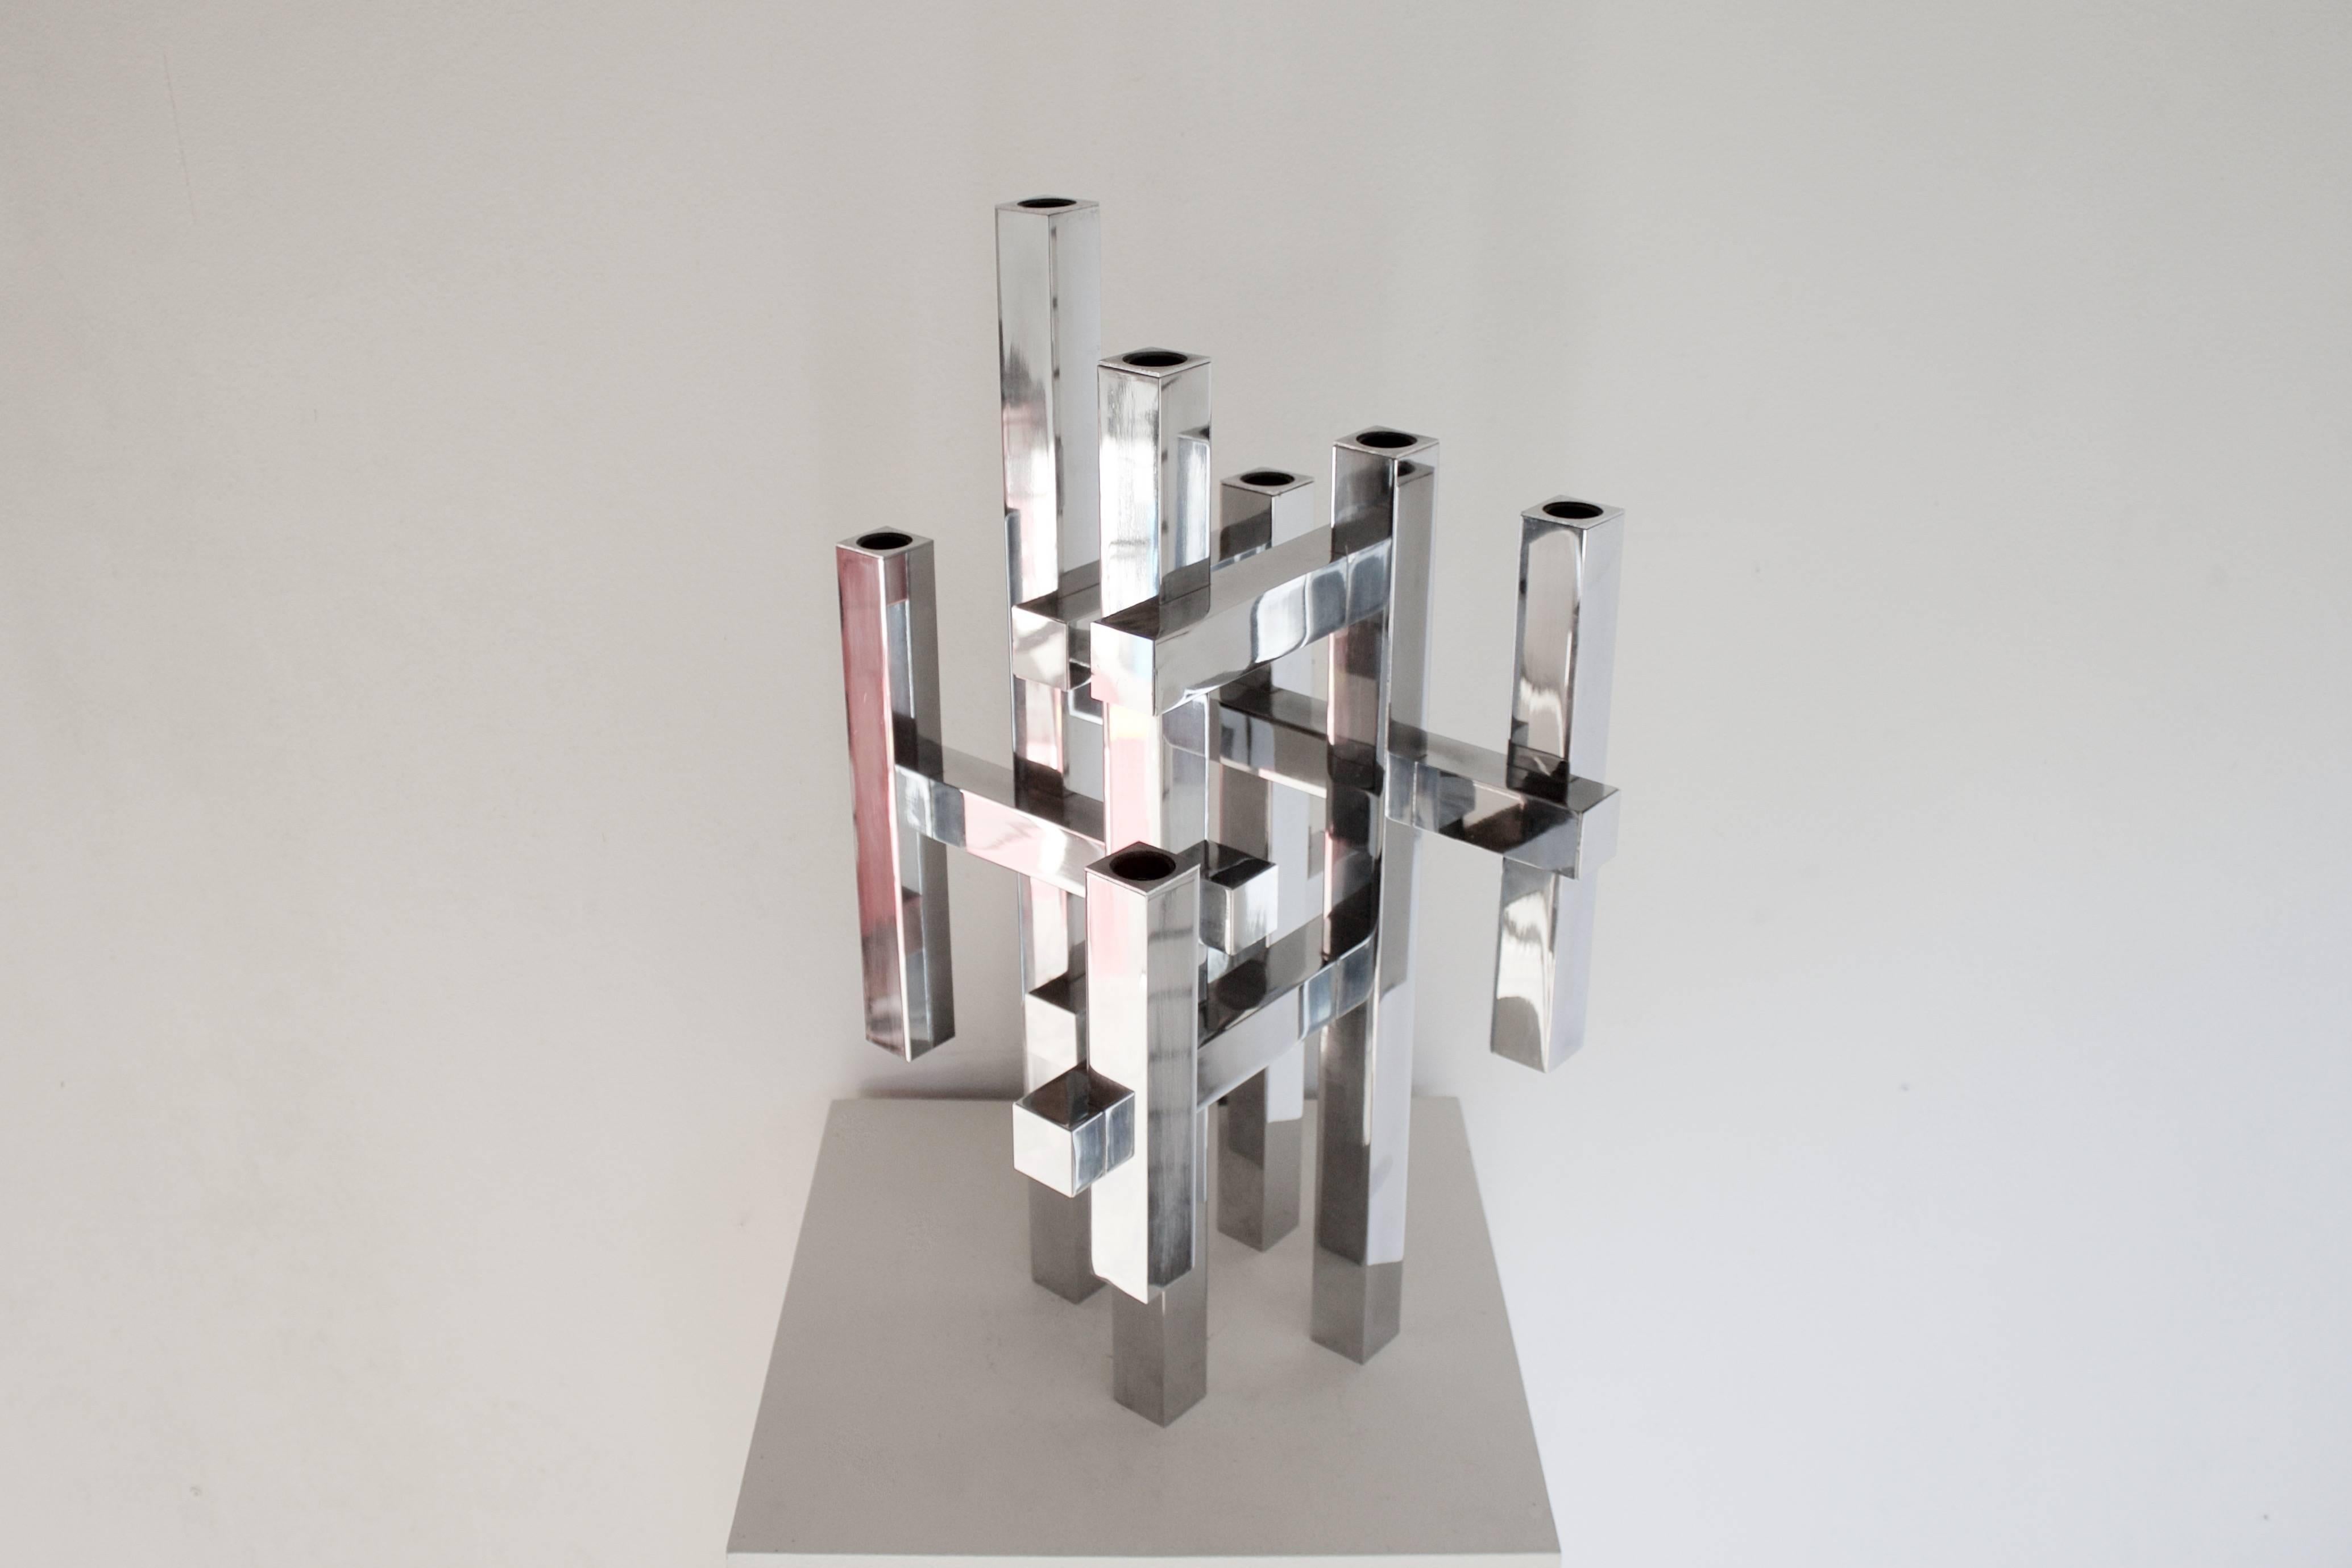 Impressive Gaetano Sciolari table lamp which holds eight lamps.

The geometric form is created by intersecting vertical and horizontal bars

The chromed surface creates a beautiful effect and gives the lamp a rich appearance

The Mid-Century